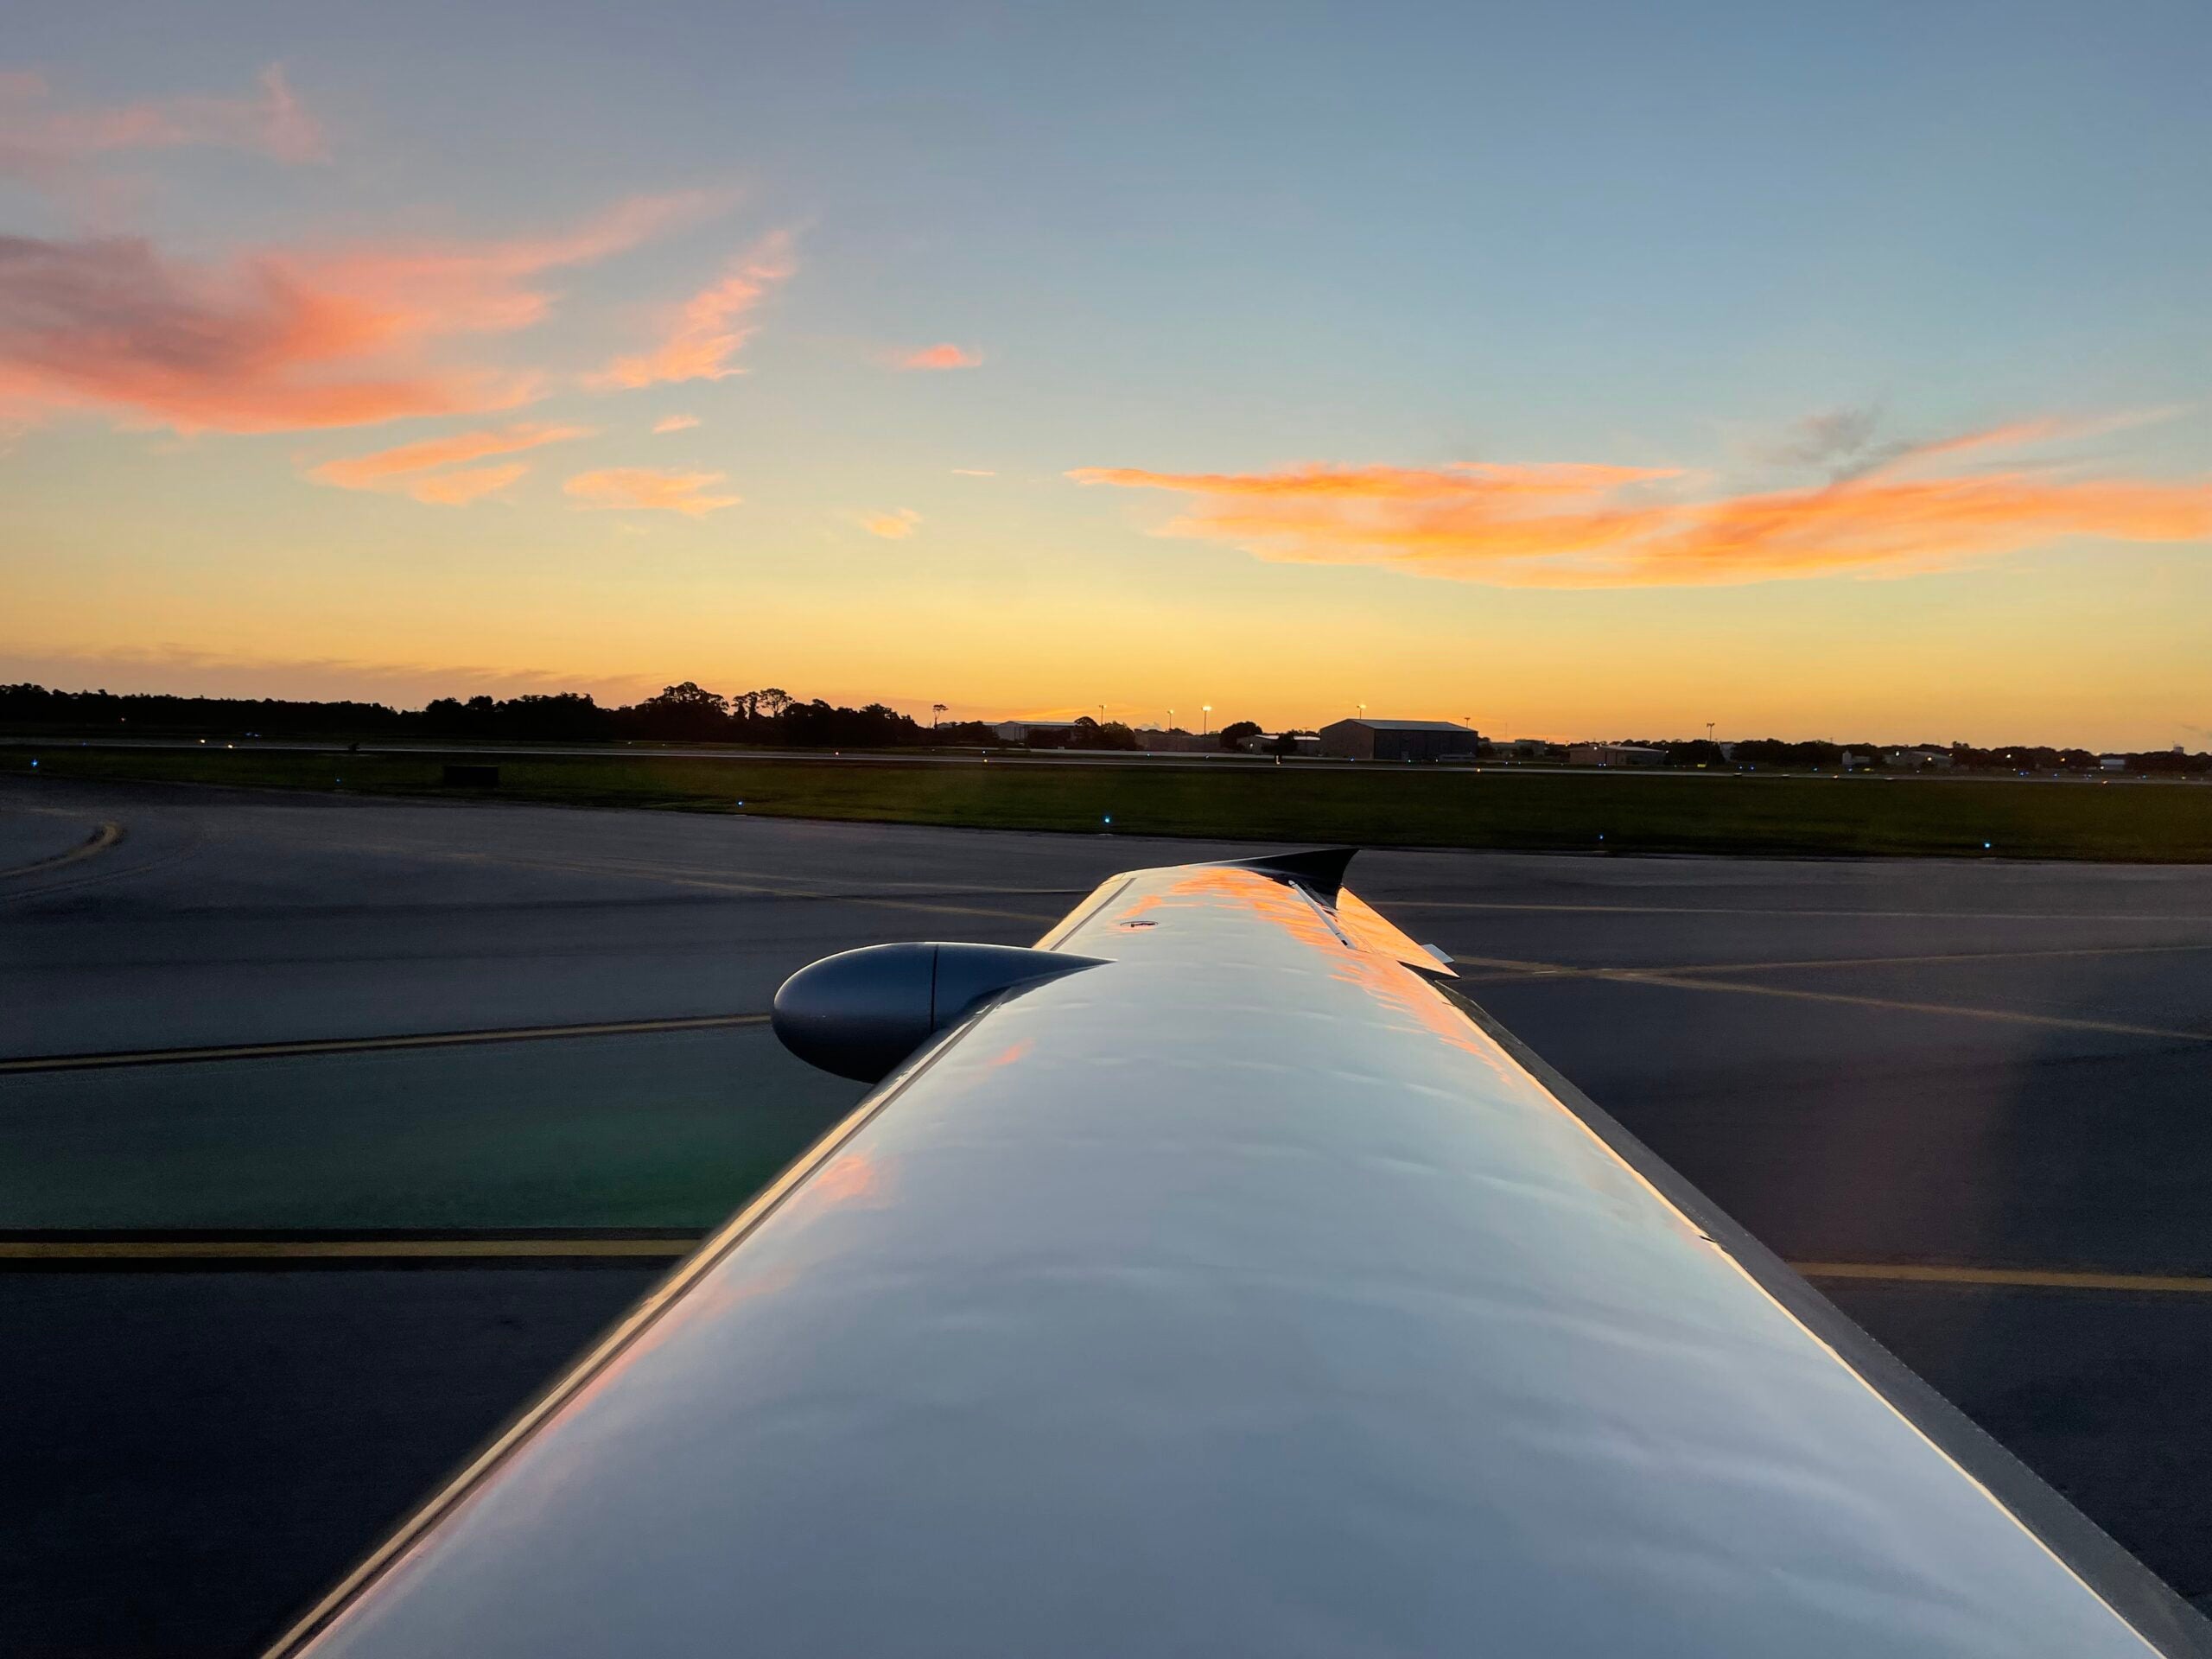 Should You Add Flaps Mid-Takeoff on a Short Runway?